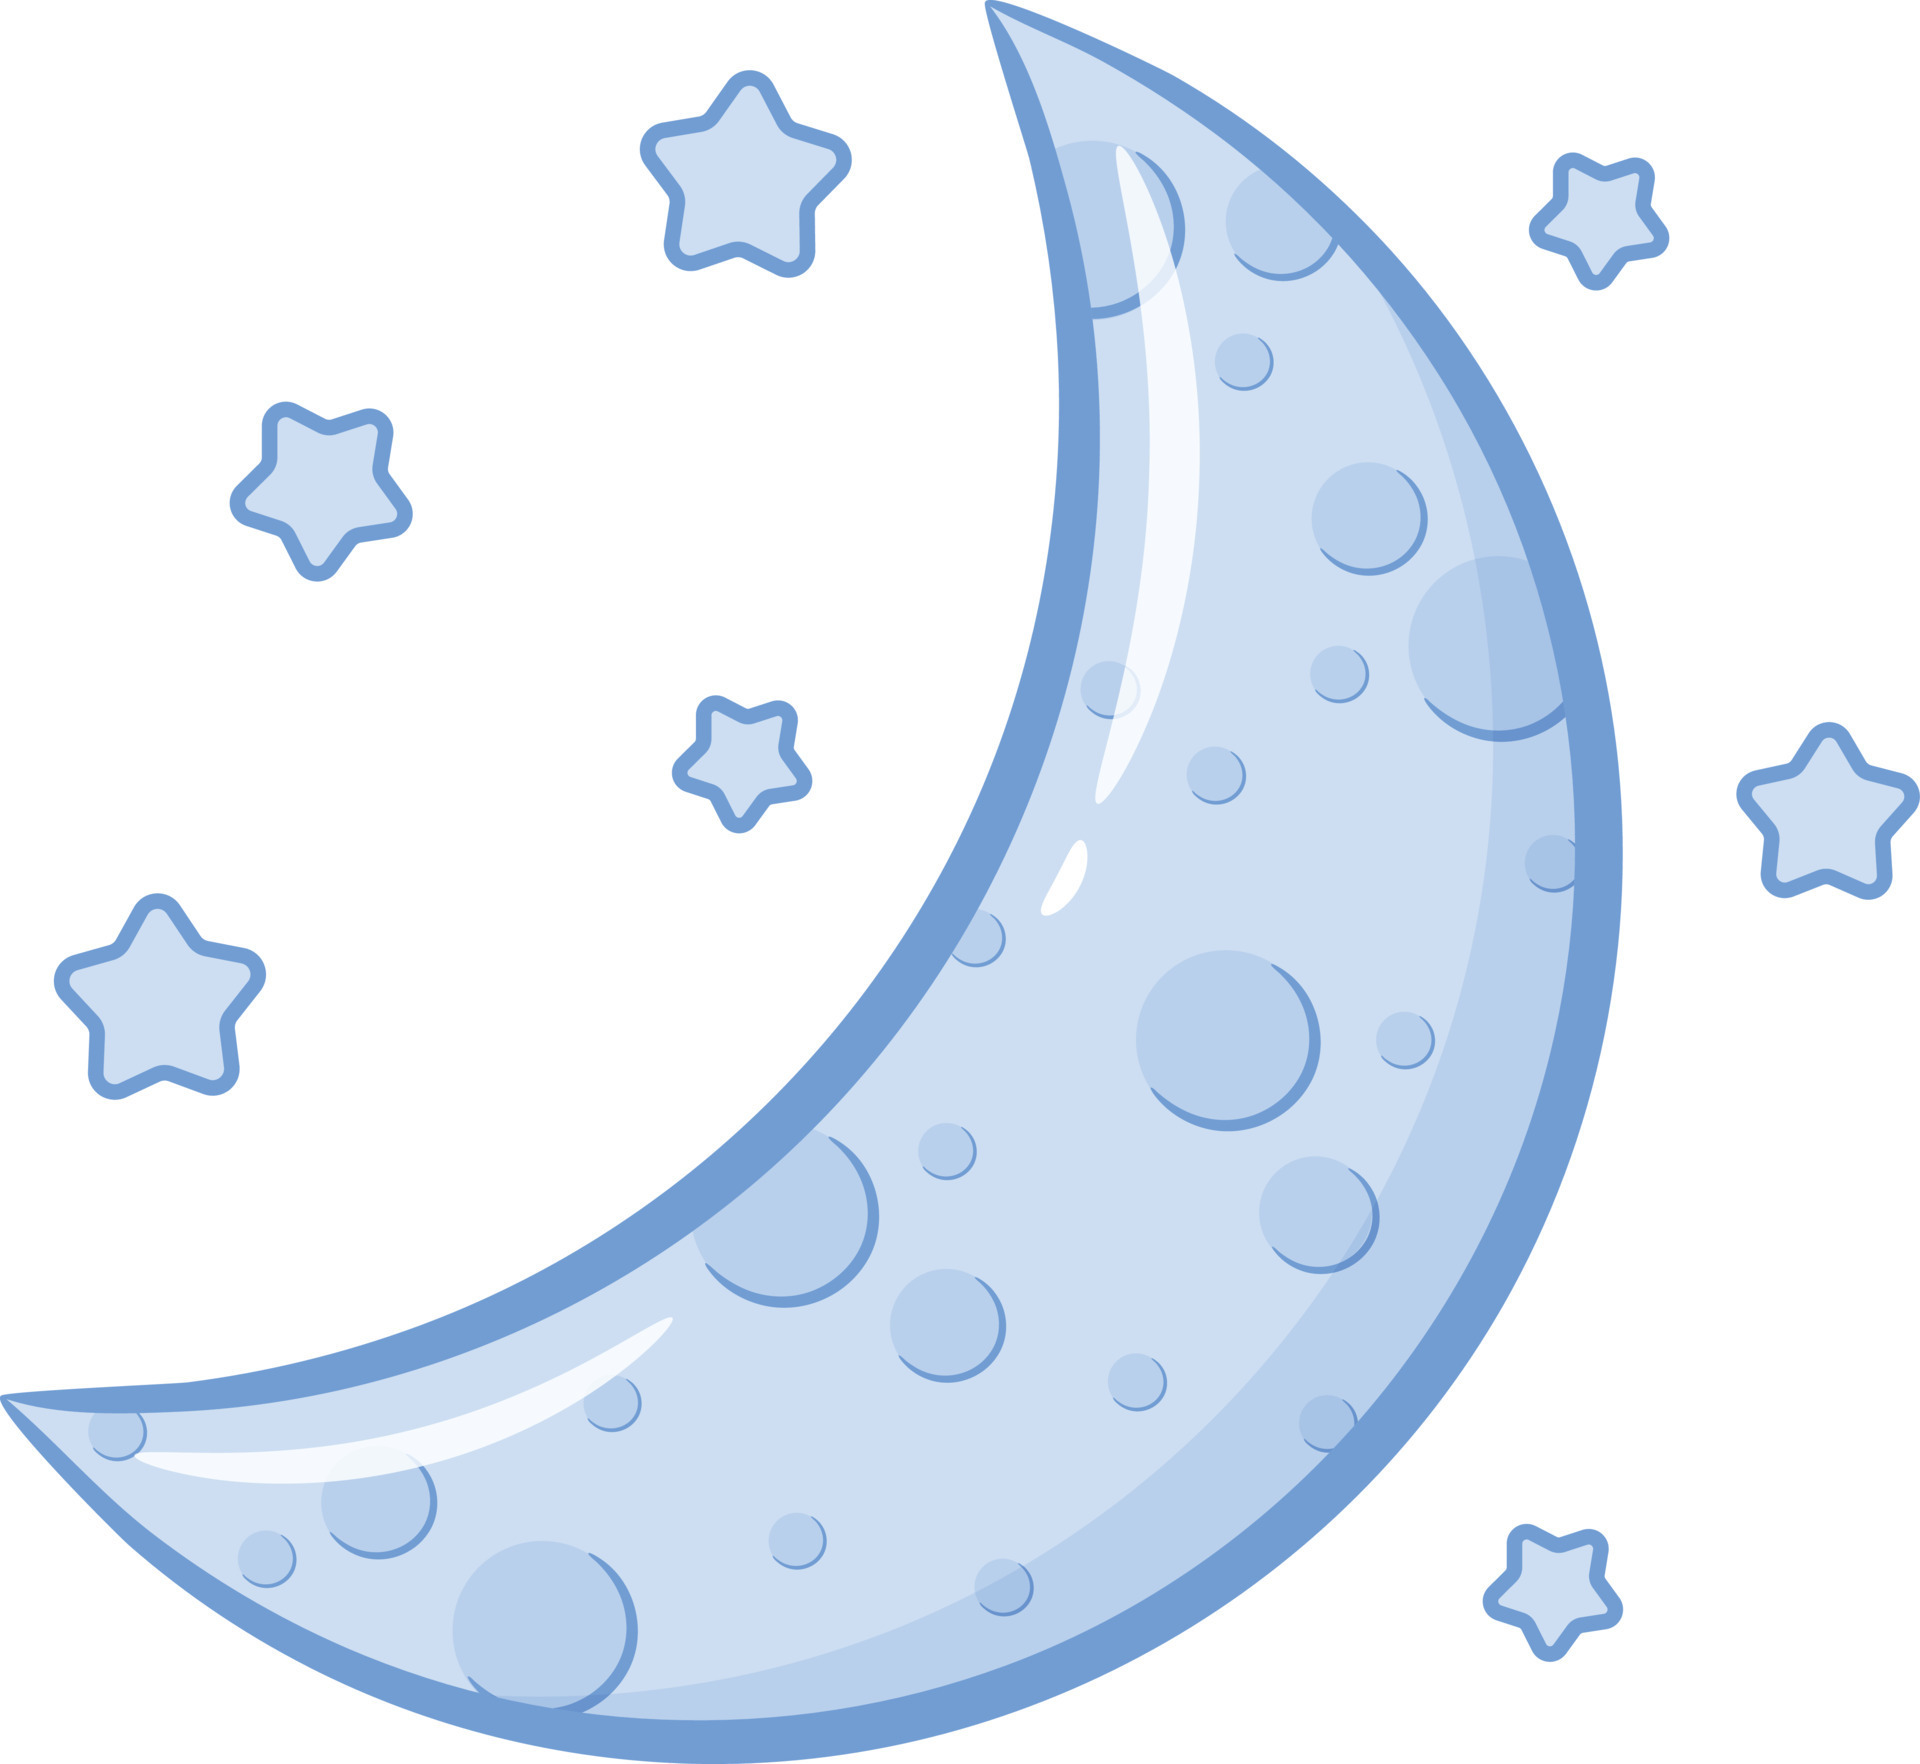 moon and stars cute drawing for school flashcard 13272629 Vector ...